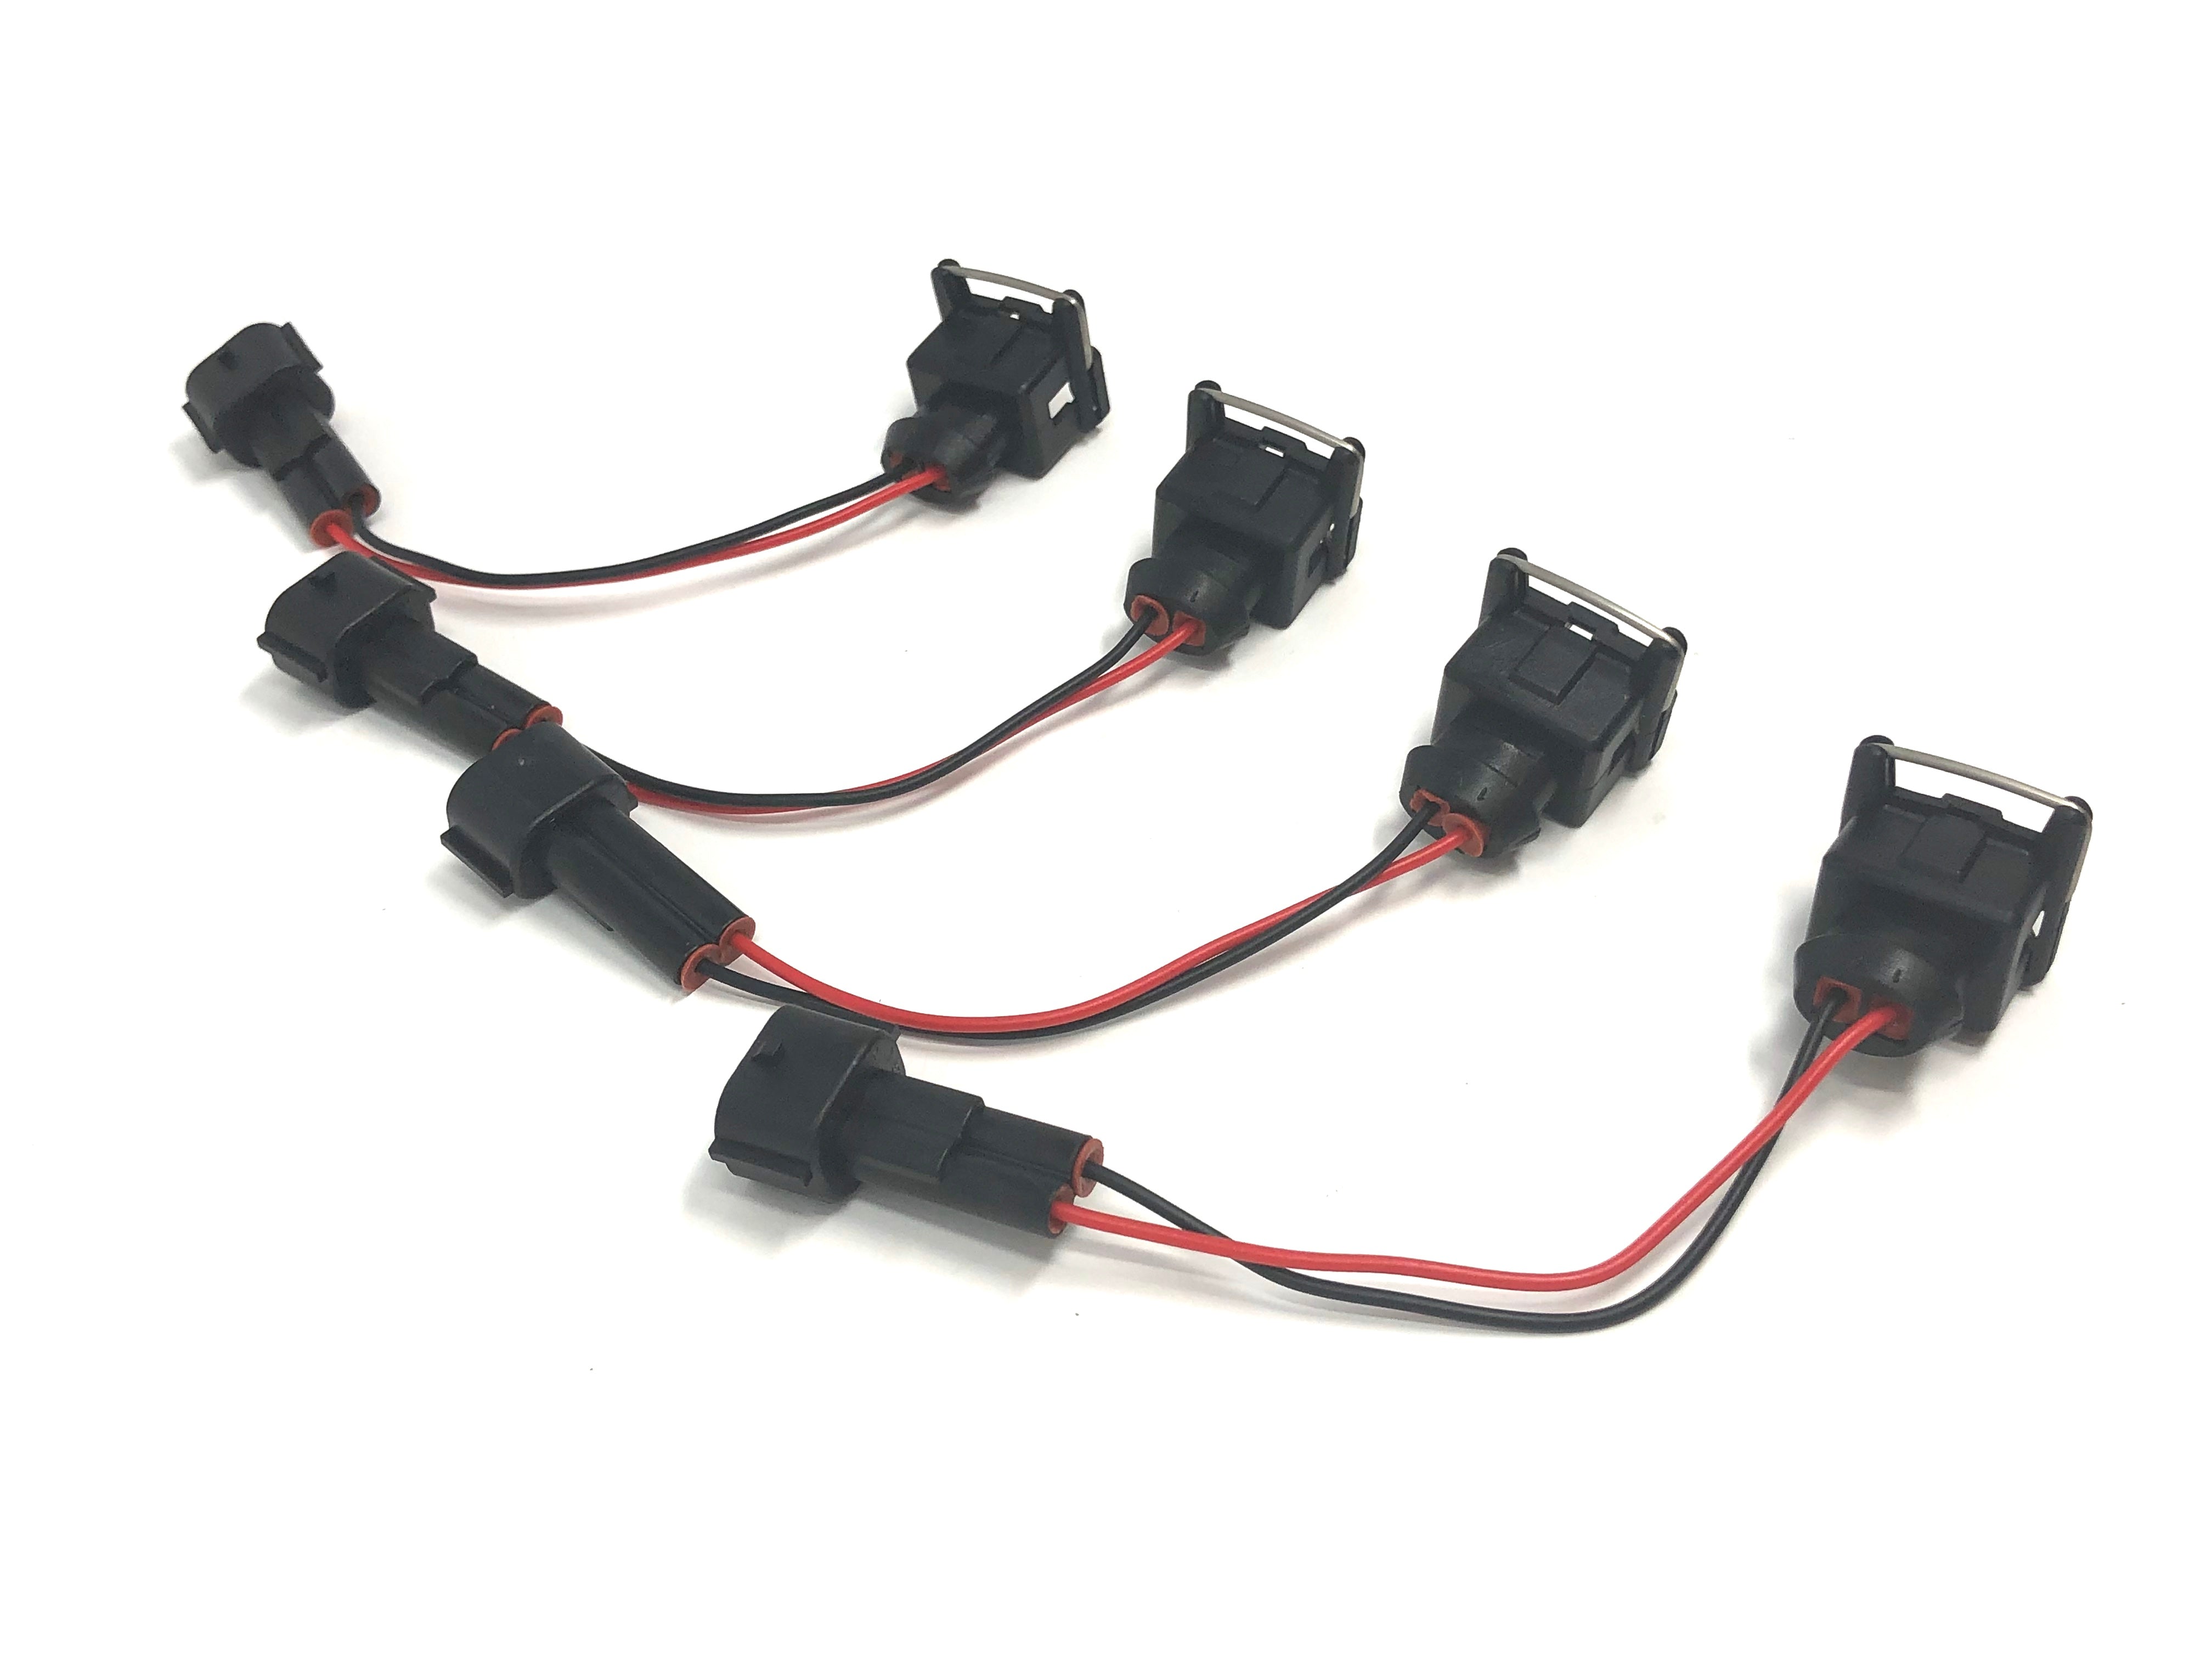 VW / Audi ROW Car to EV1 Injector Adapter Harness (4 Pack) - 0